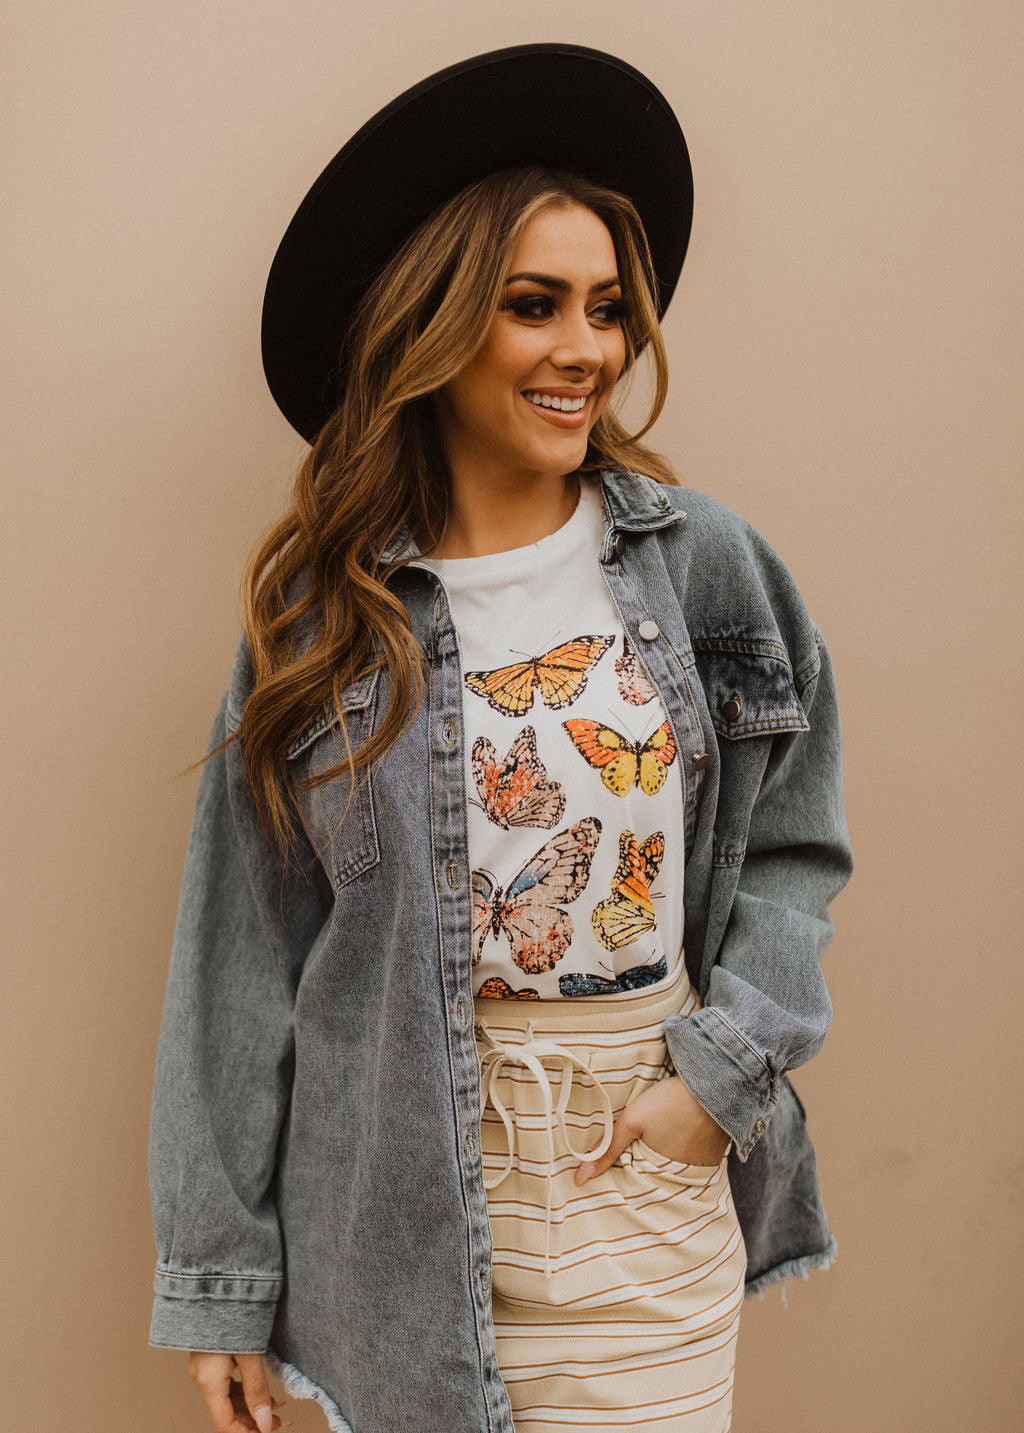 THE MULTICOLORED BUTTERFLY GRAPHIC TEE IN IVORY